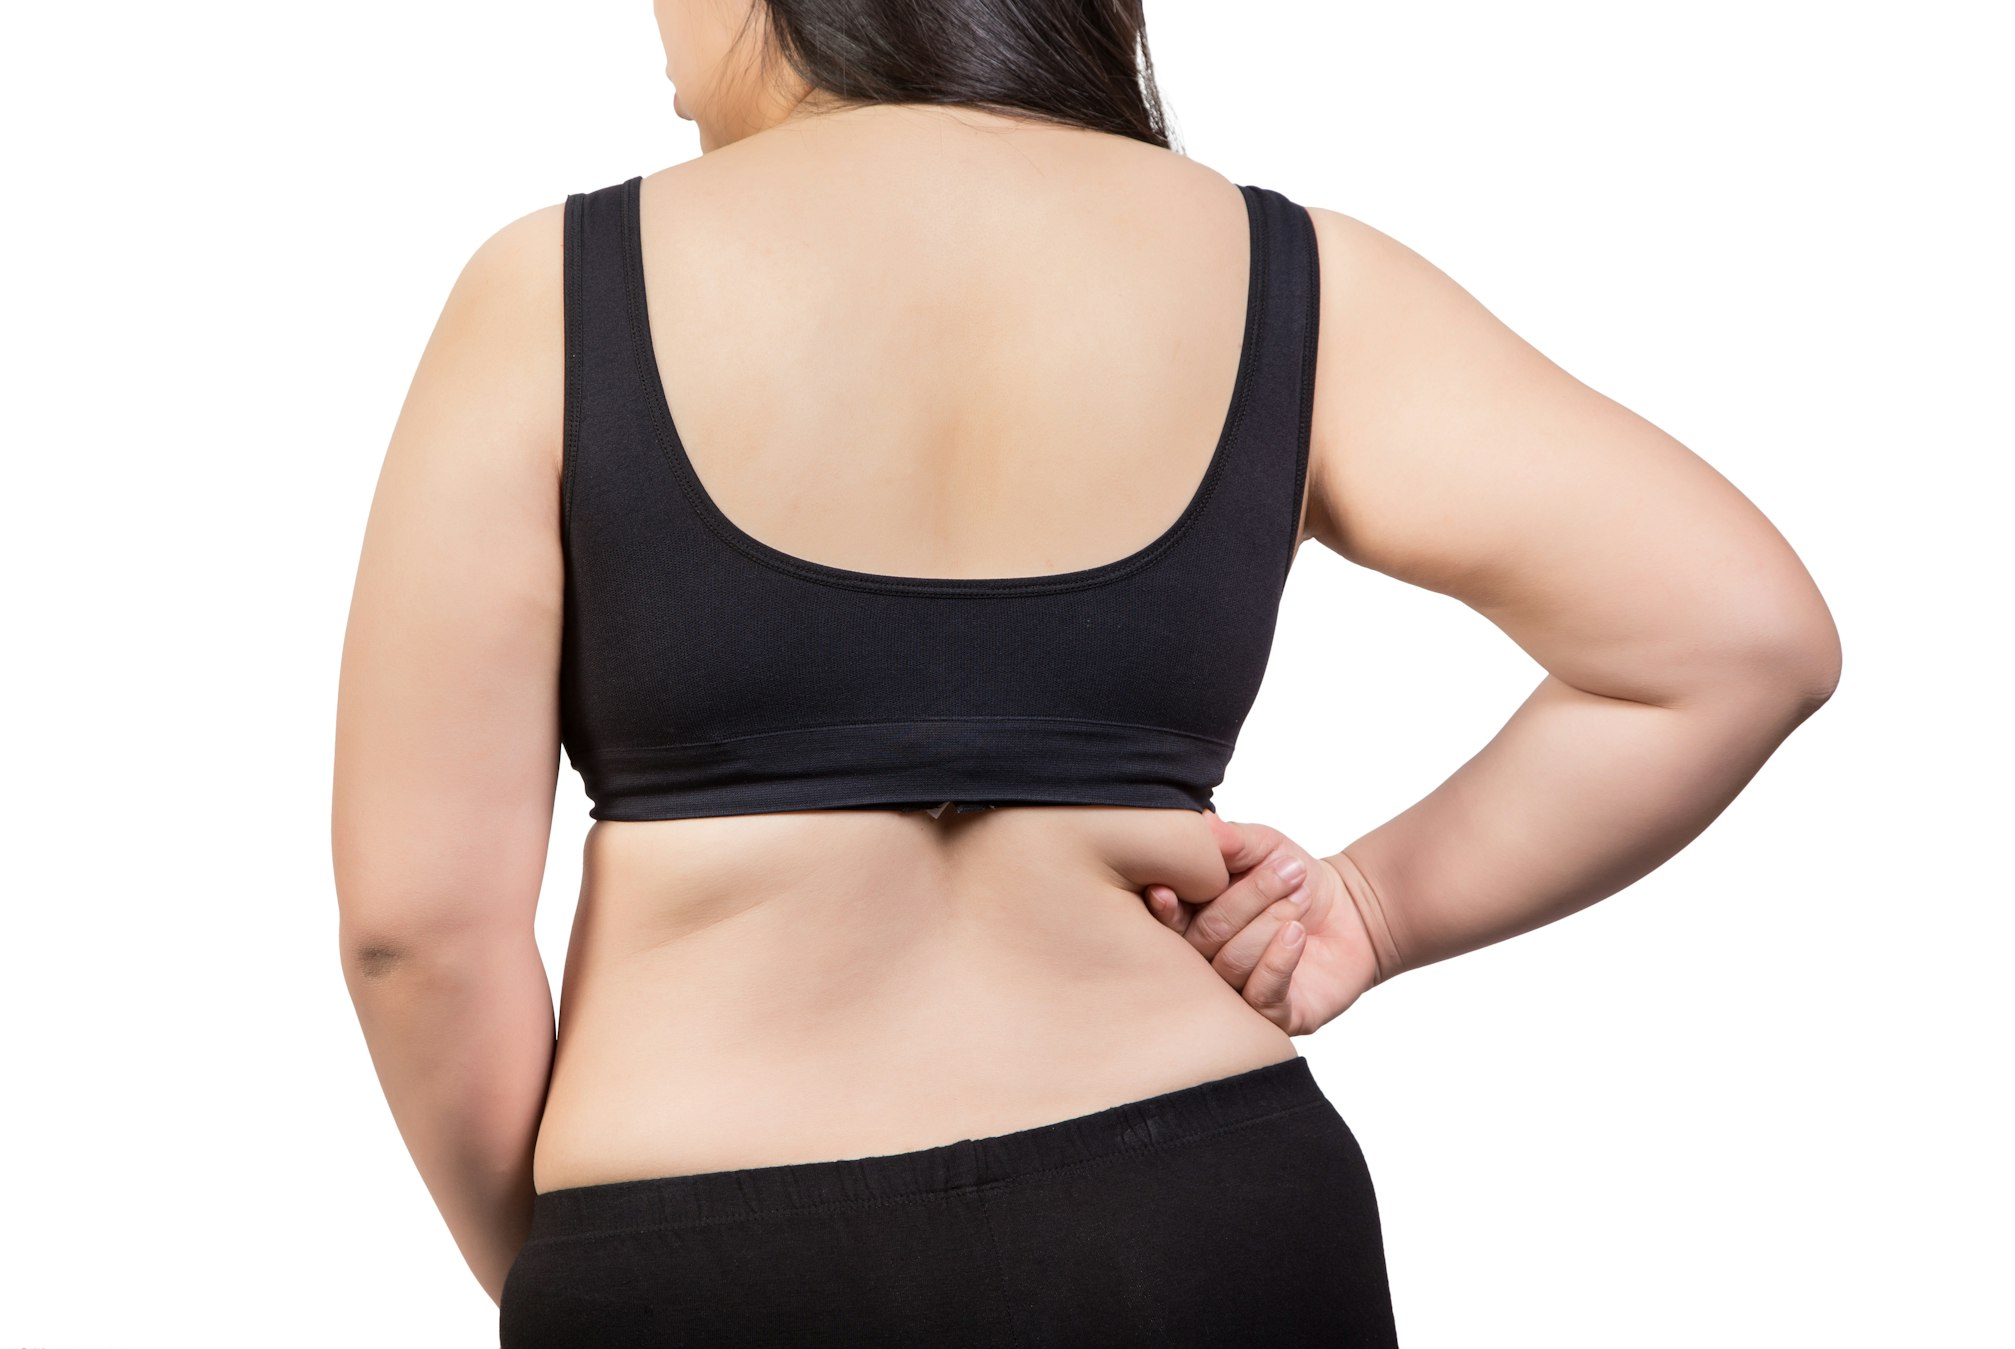 Exploring the Factors That Cause Back Fat Under the Bra